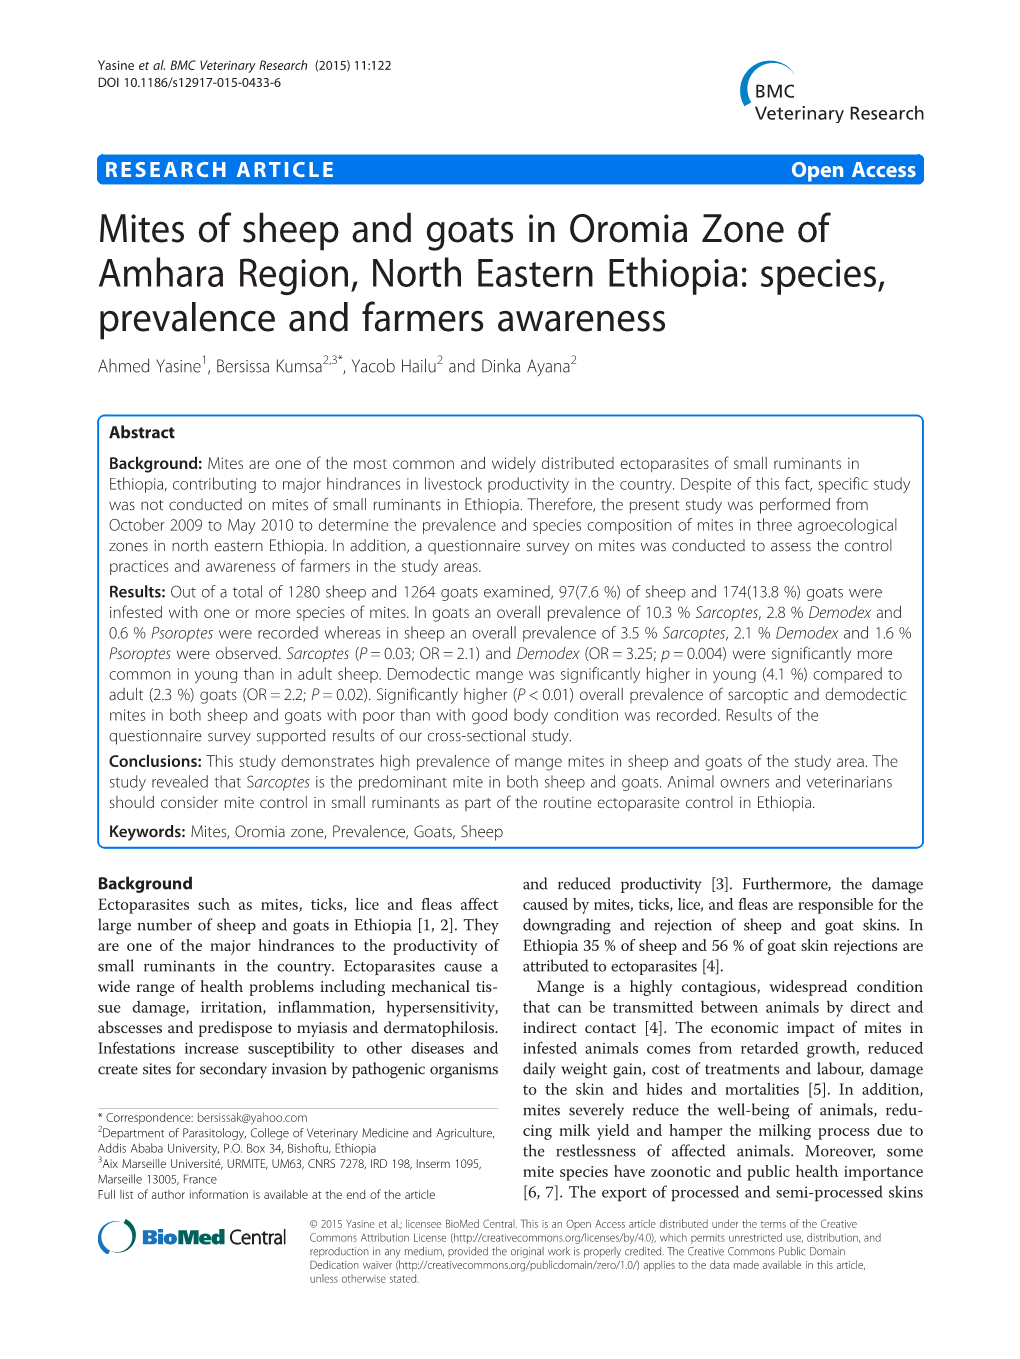 Mites of Sheep and Goats in Oromia Zone of Amhara Region, North